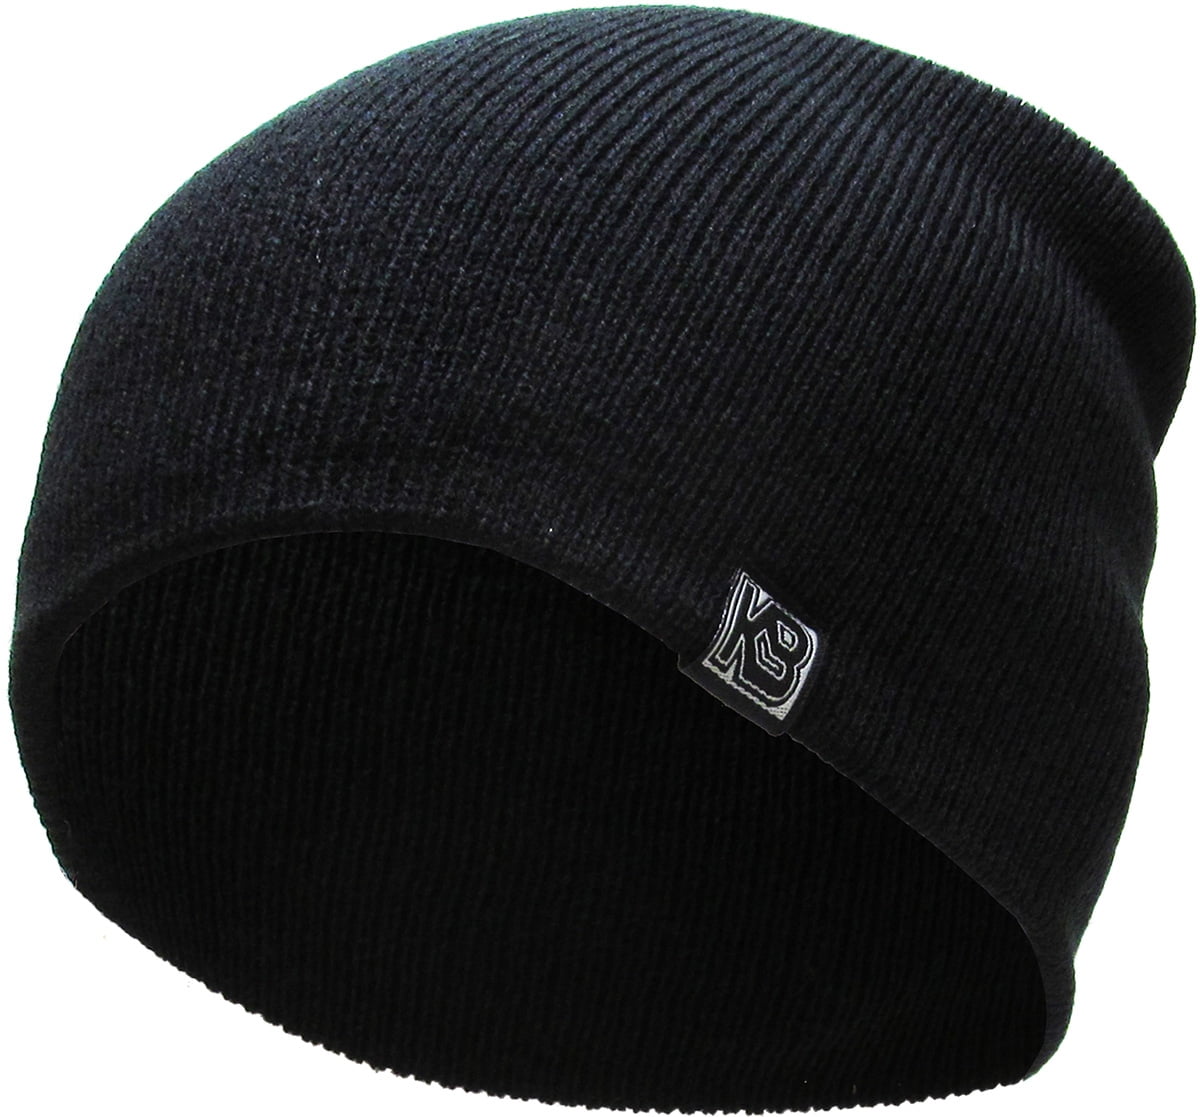 Black and White Elements Football Mens Womens Winter Beanies Knit Hat Stretch Skull Cap